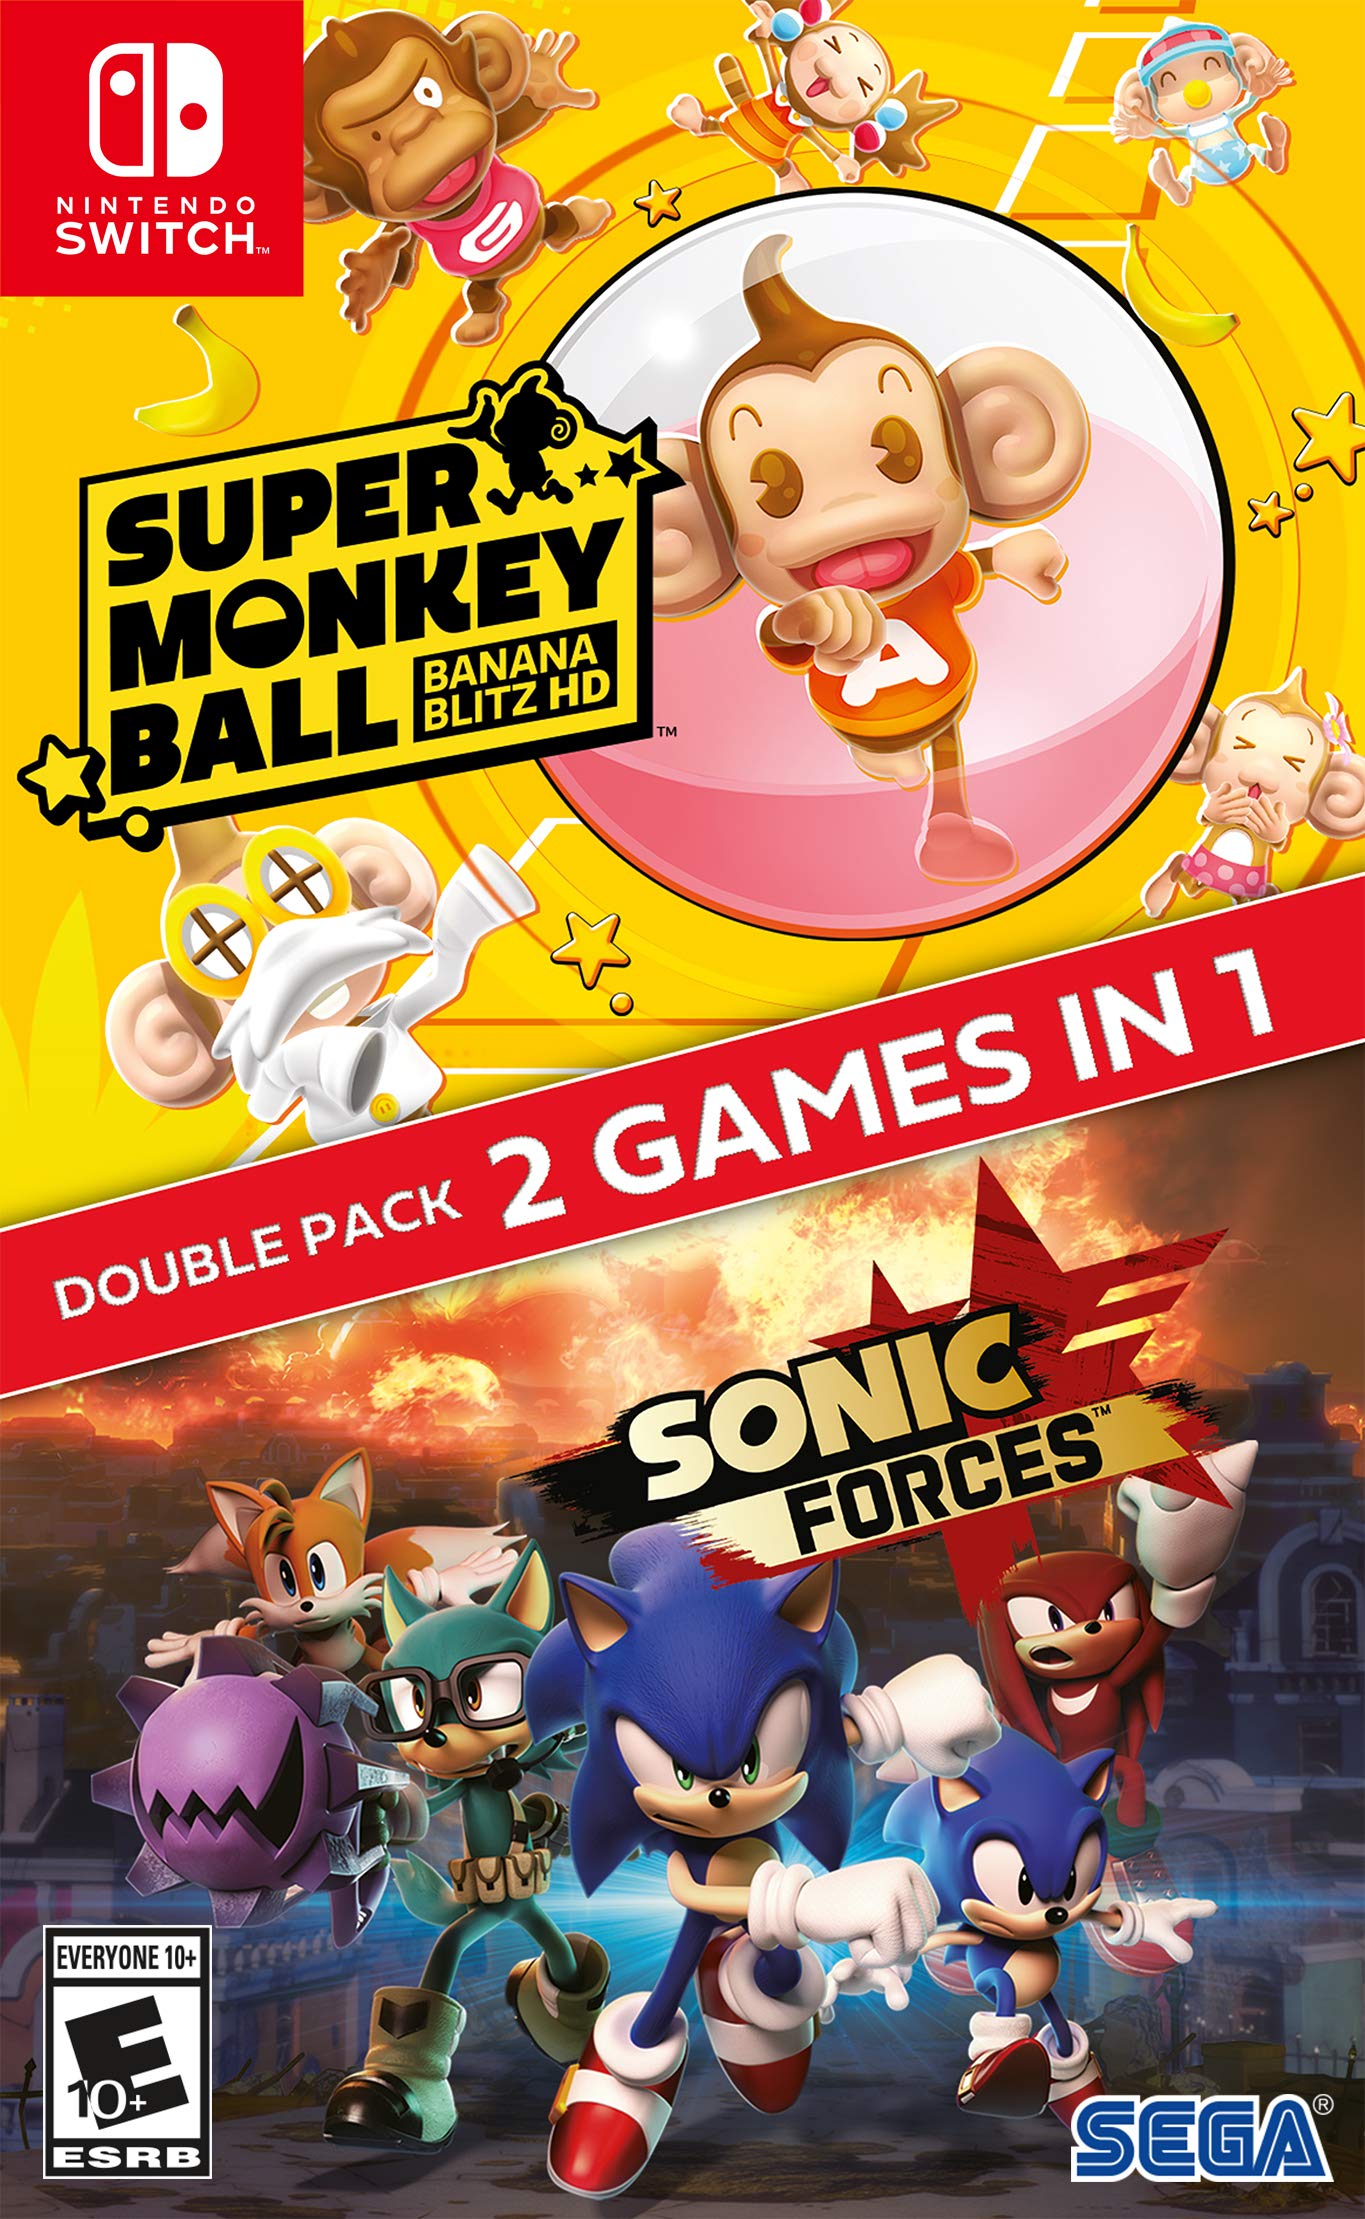 SONIC FORCES + SUPER MONKEY BALL: BANANA BLITZ HD DOUBLE PACK NSW